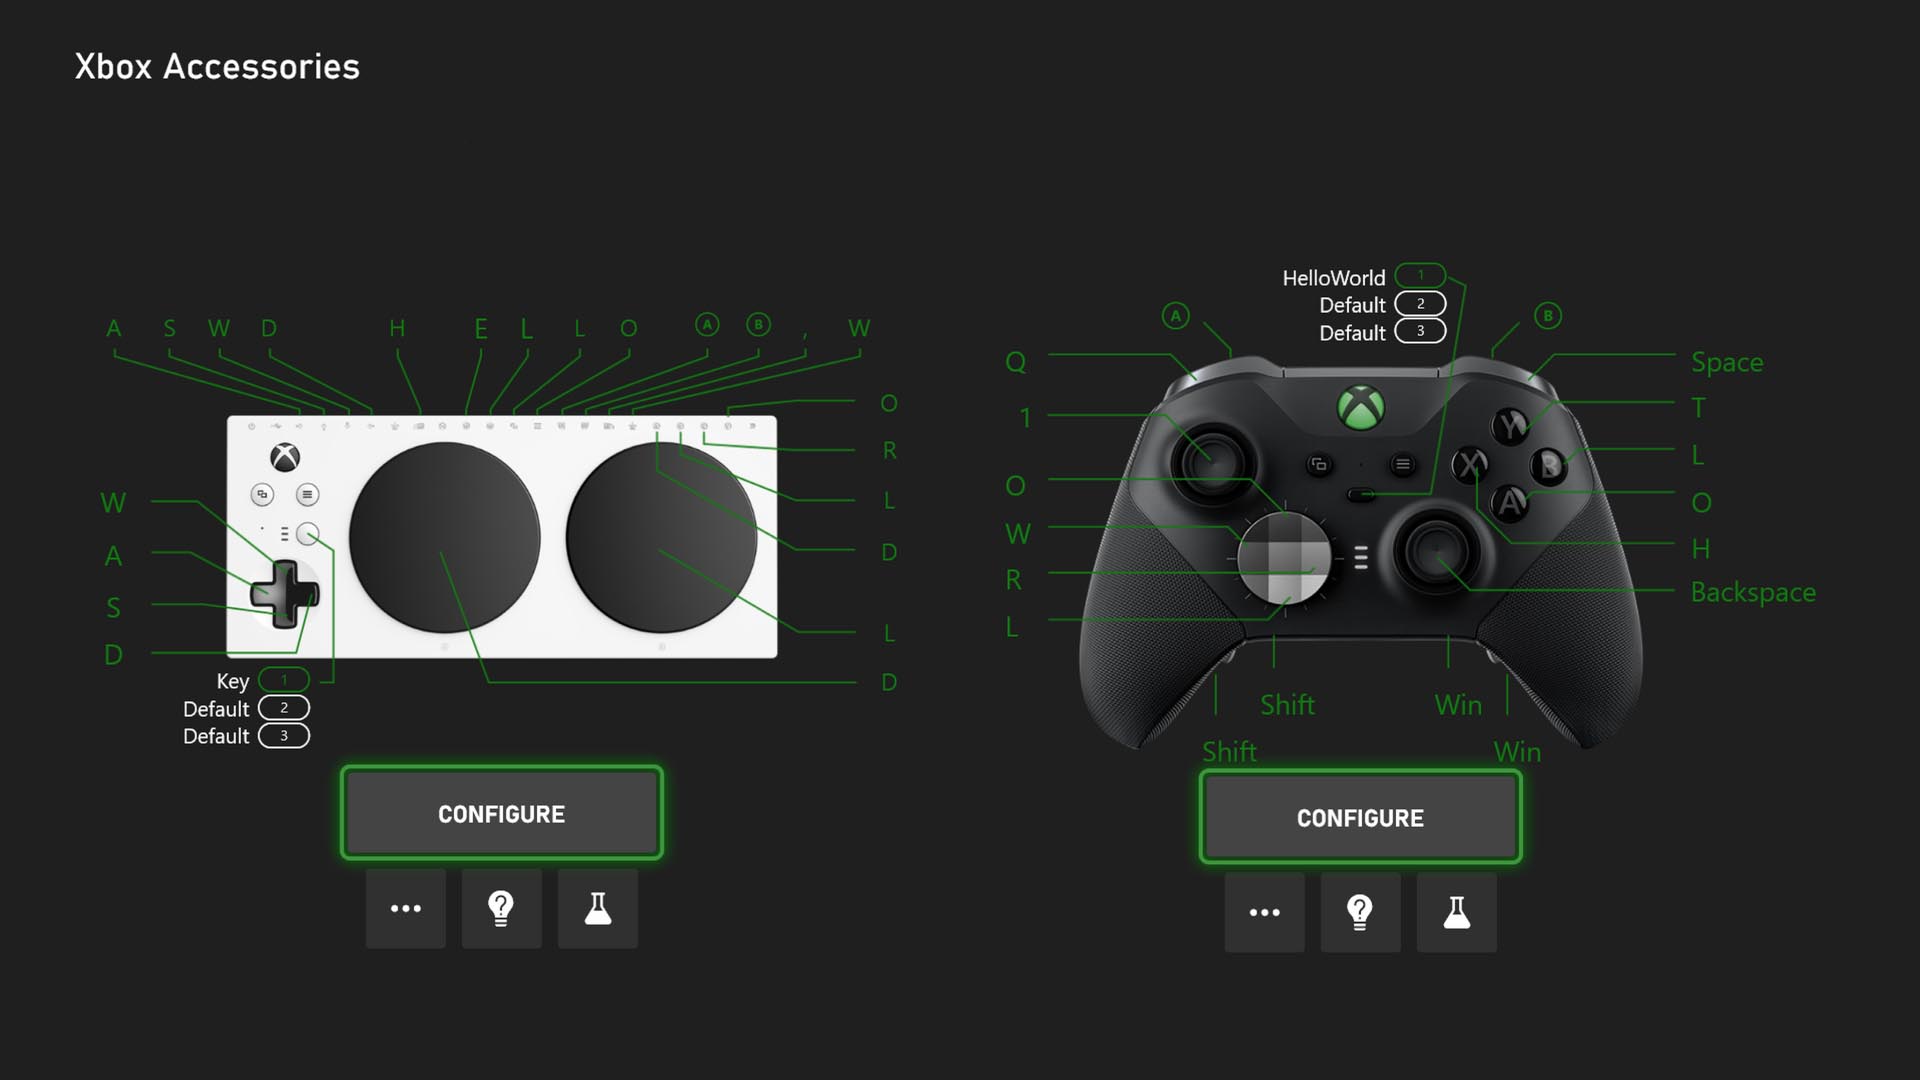 An “Xbox Accessories” menu on-console displays different configuration settings that allow players to remap buttons for the Xbox Adaptive Controller and Xbox Elite Series 2 Controller.